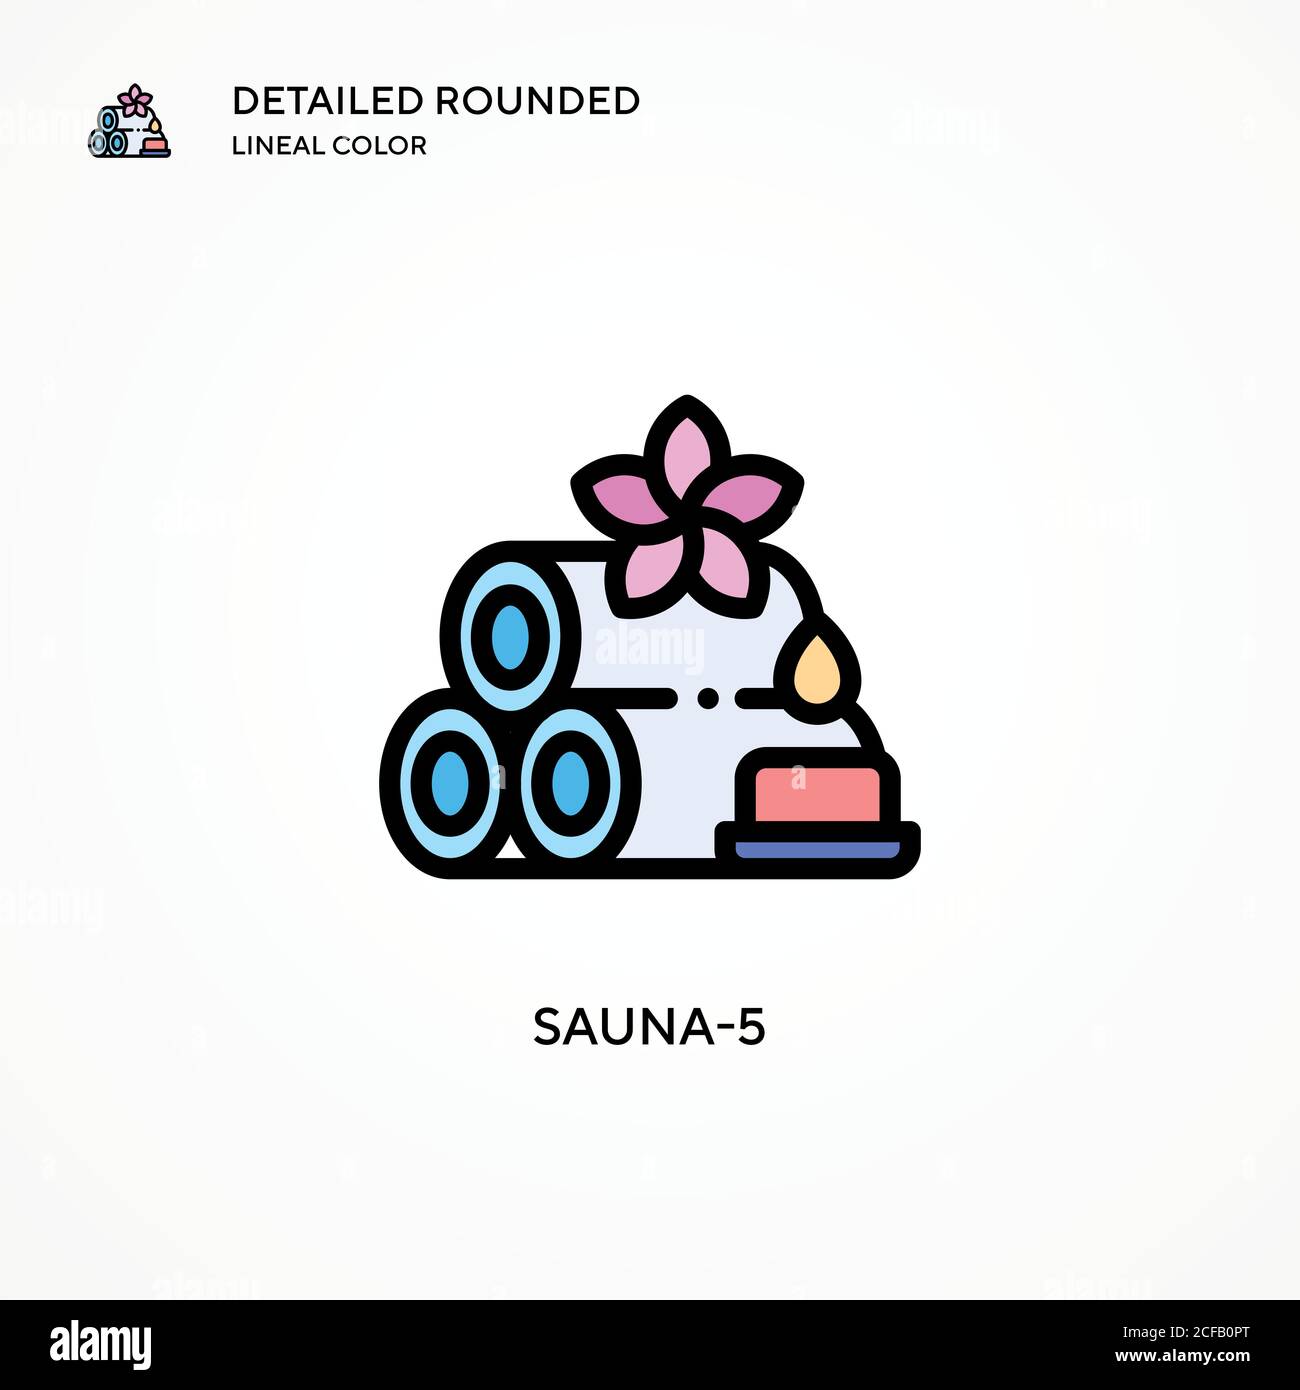 Sauna-5 vector icon. Modern vector illustration concepts. Easy to edit and customize. Stock Vector